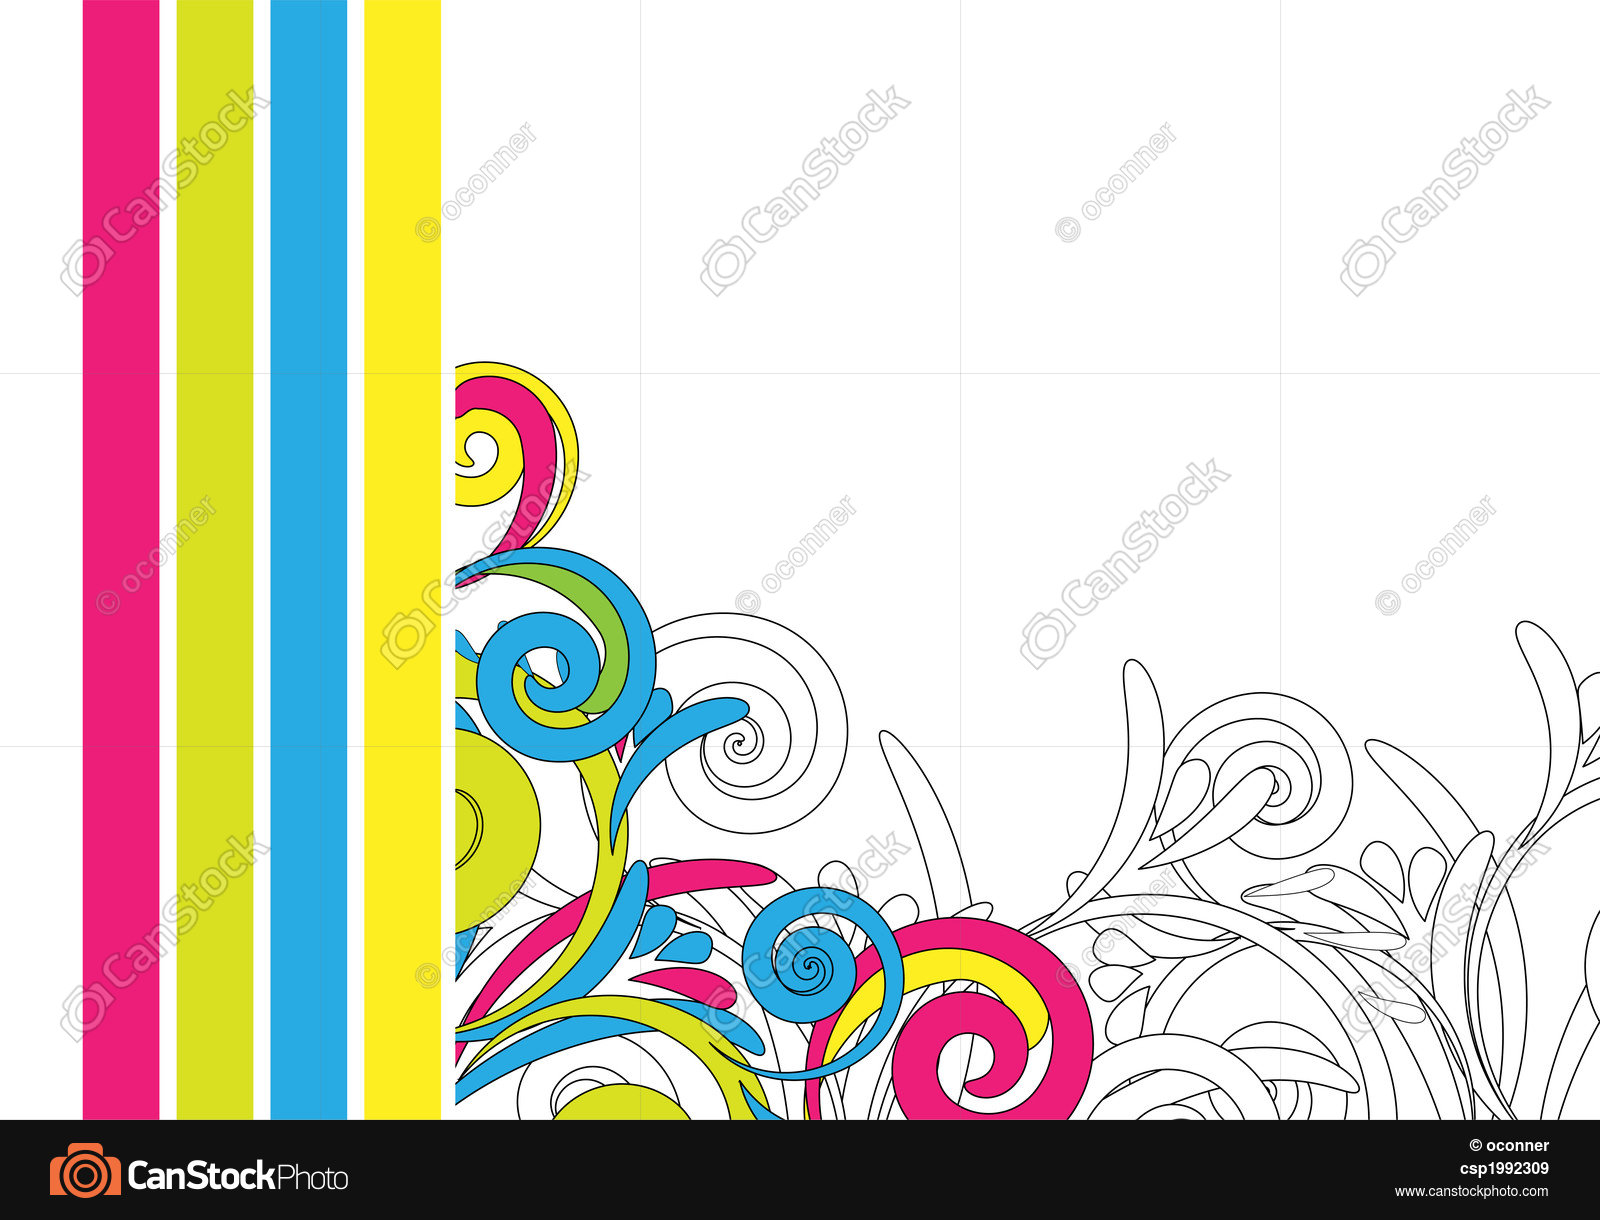 Colourful abstract background design stock illustration - Search ...